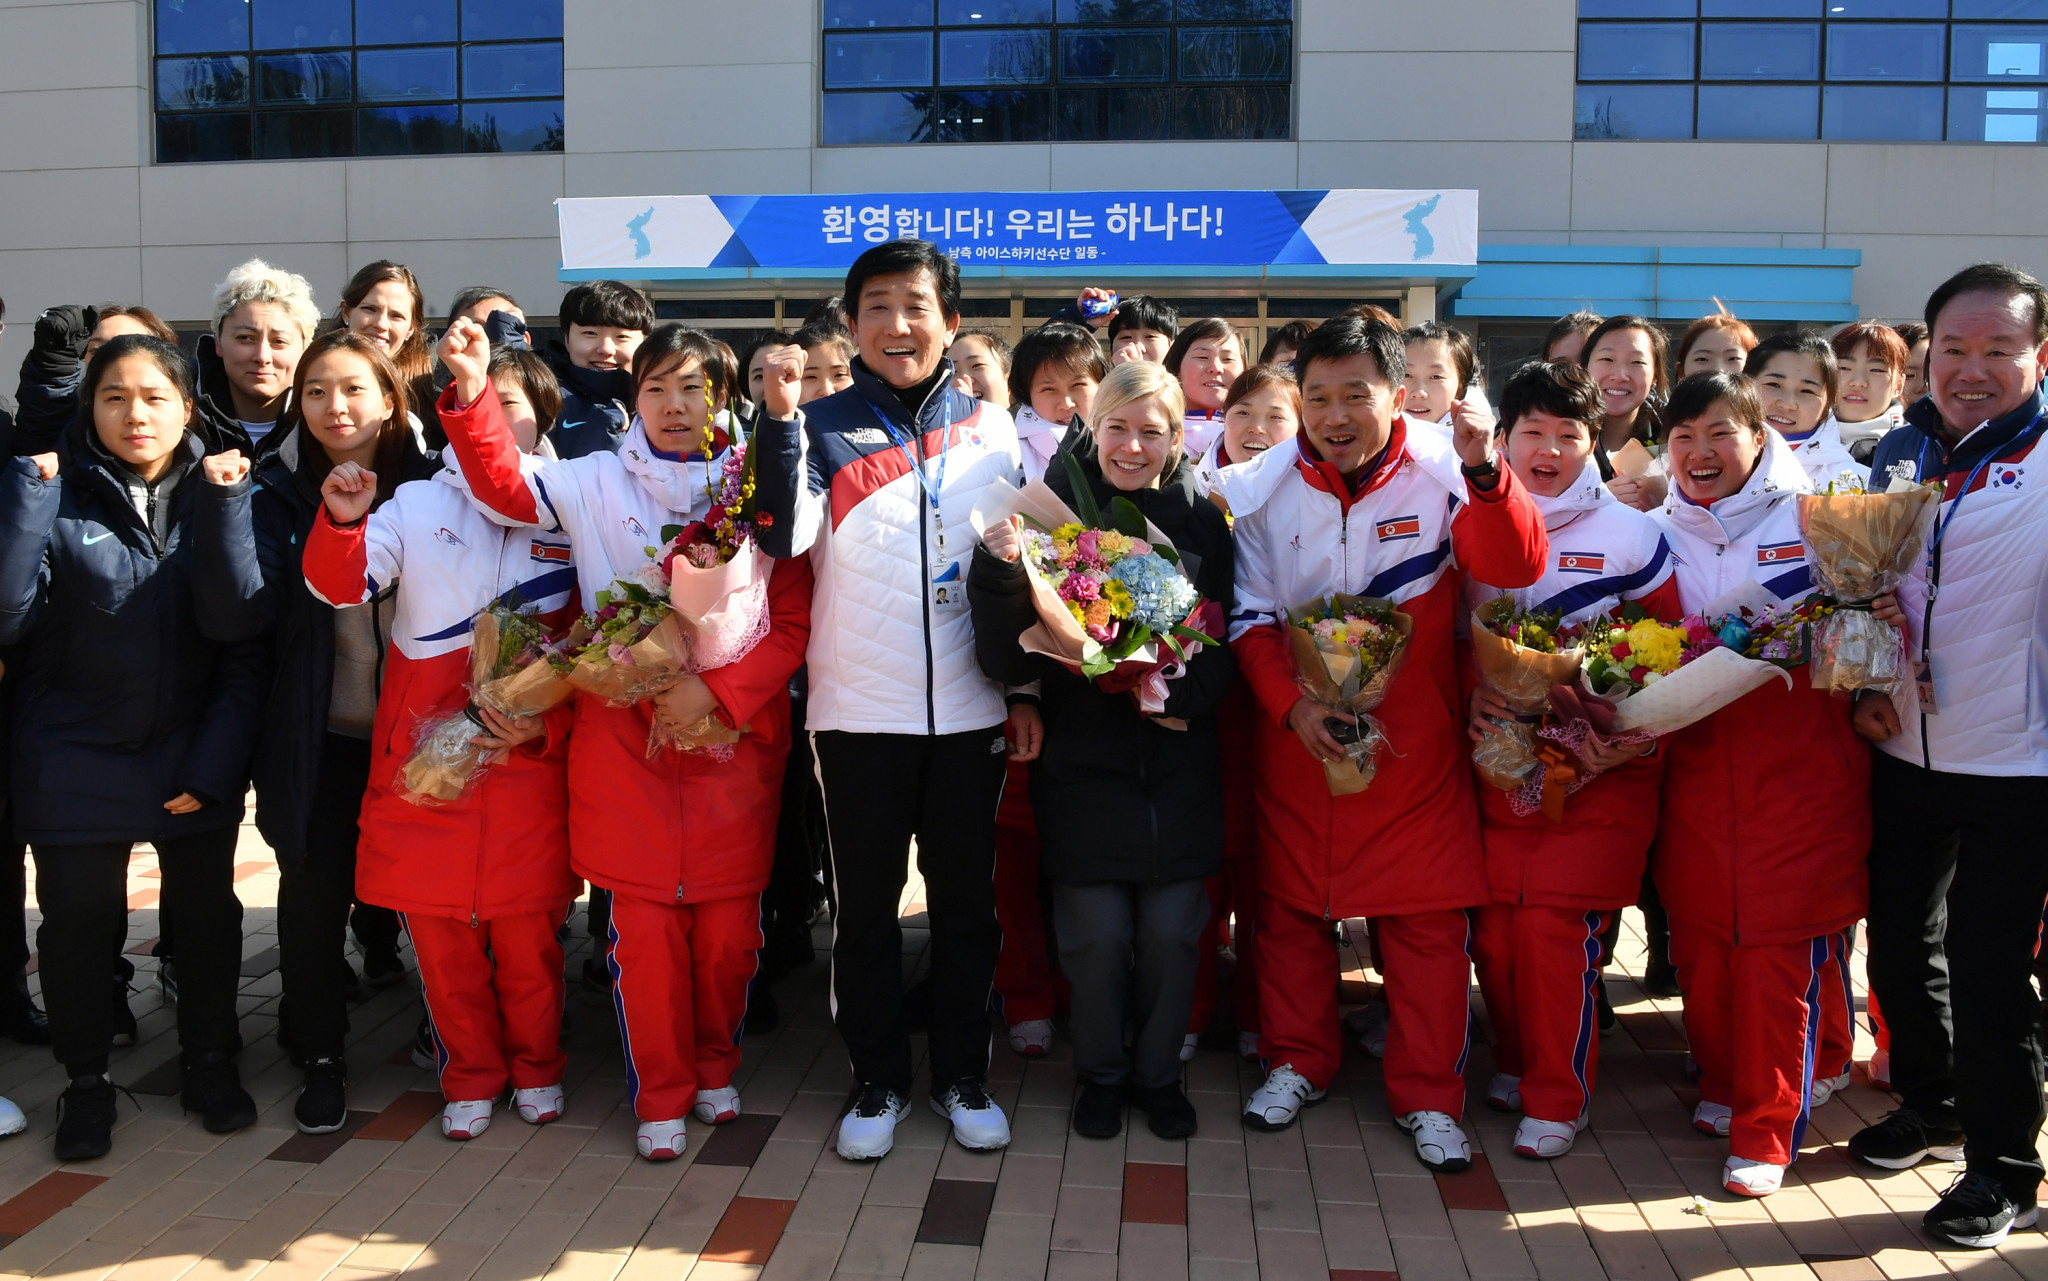 Korean ice hockey players meet to prepare for historic joint Pyeongchang 2018 team